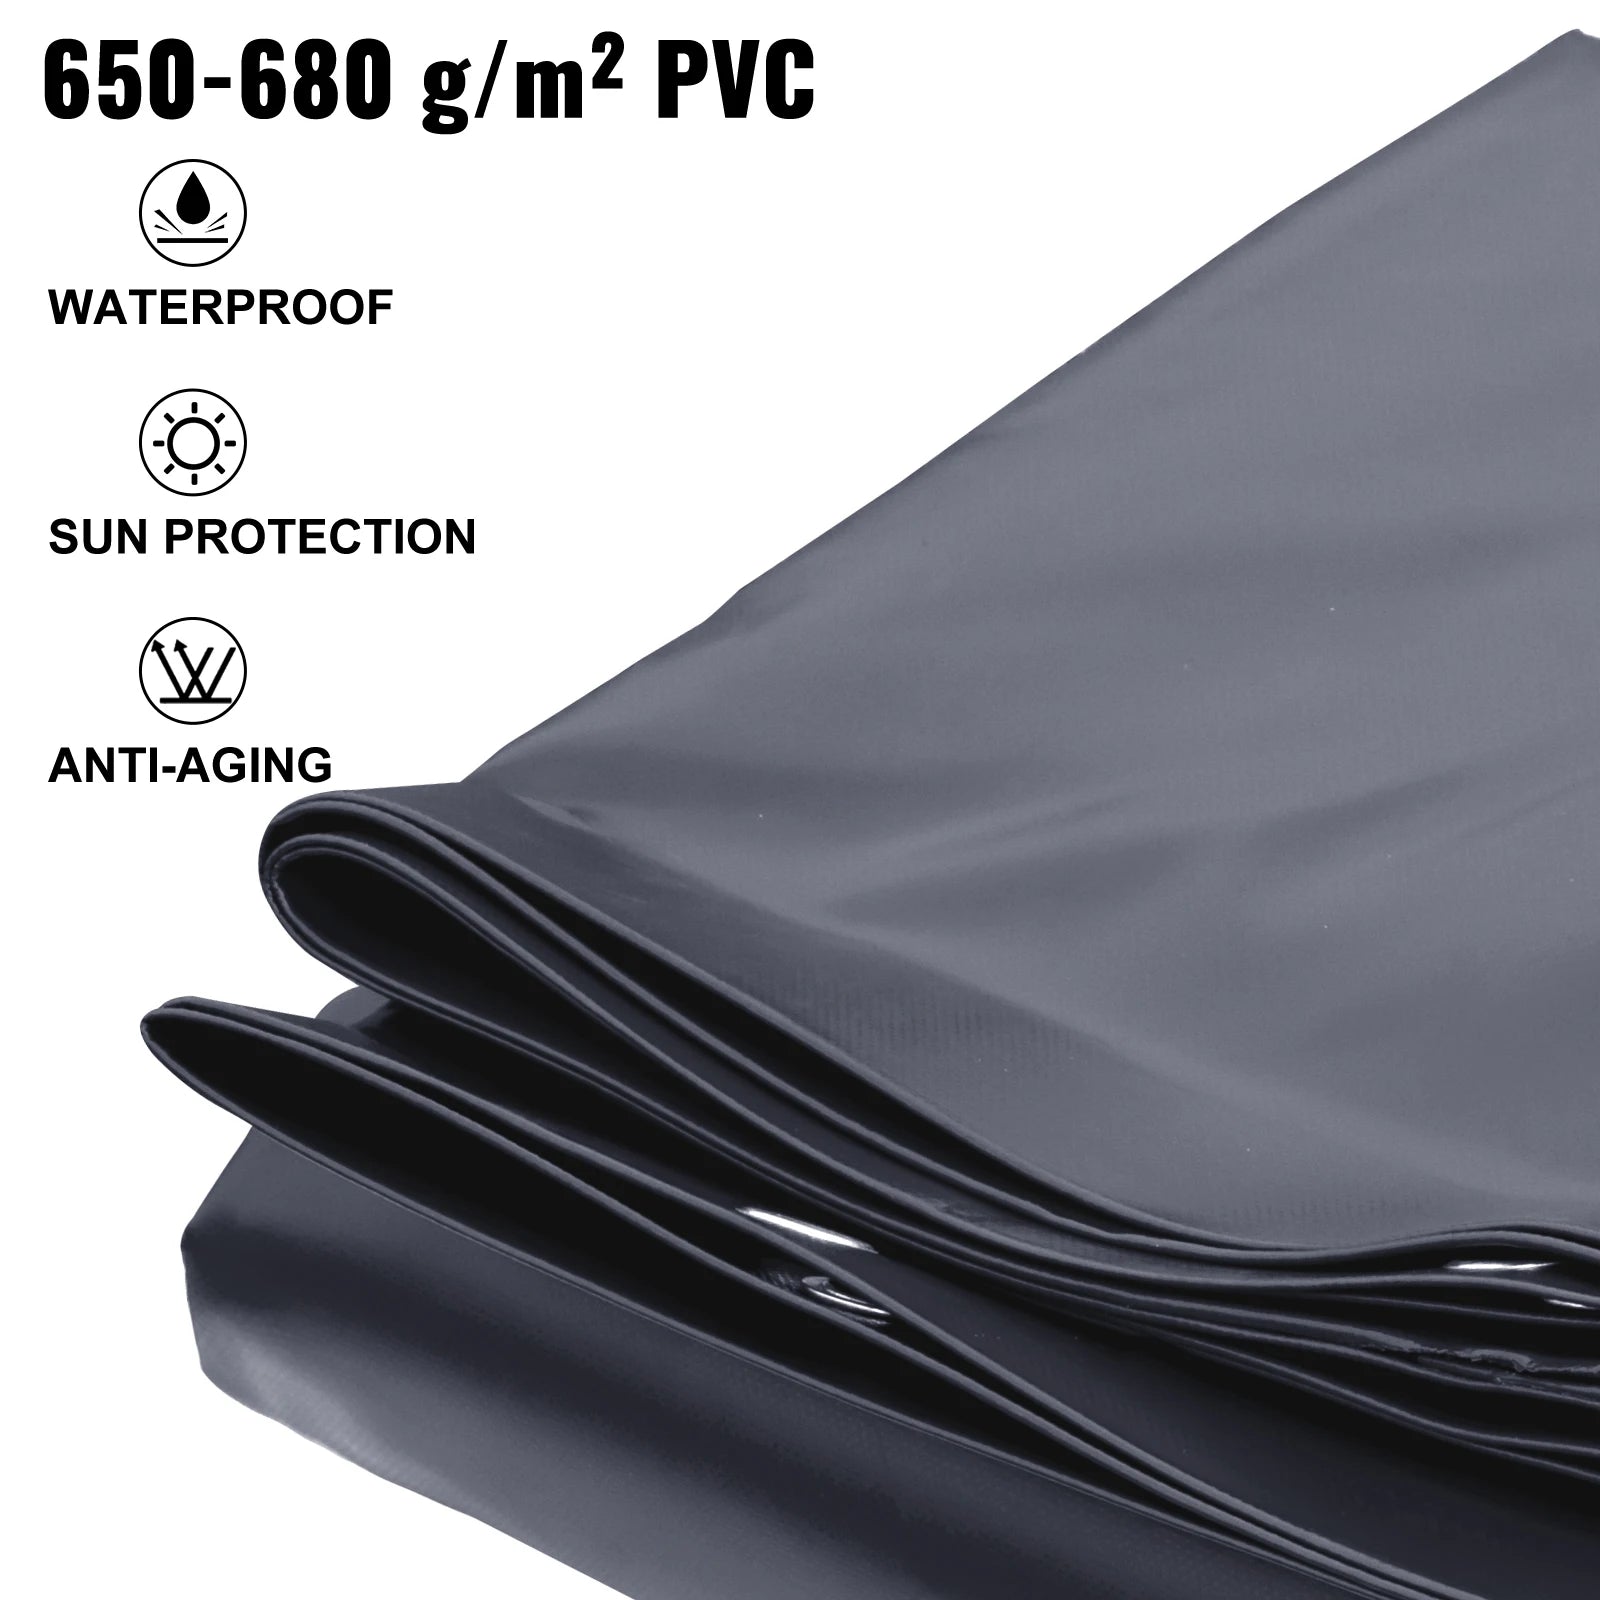 Pool Safety Cover, PVC Material, Winter Protection